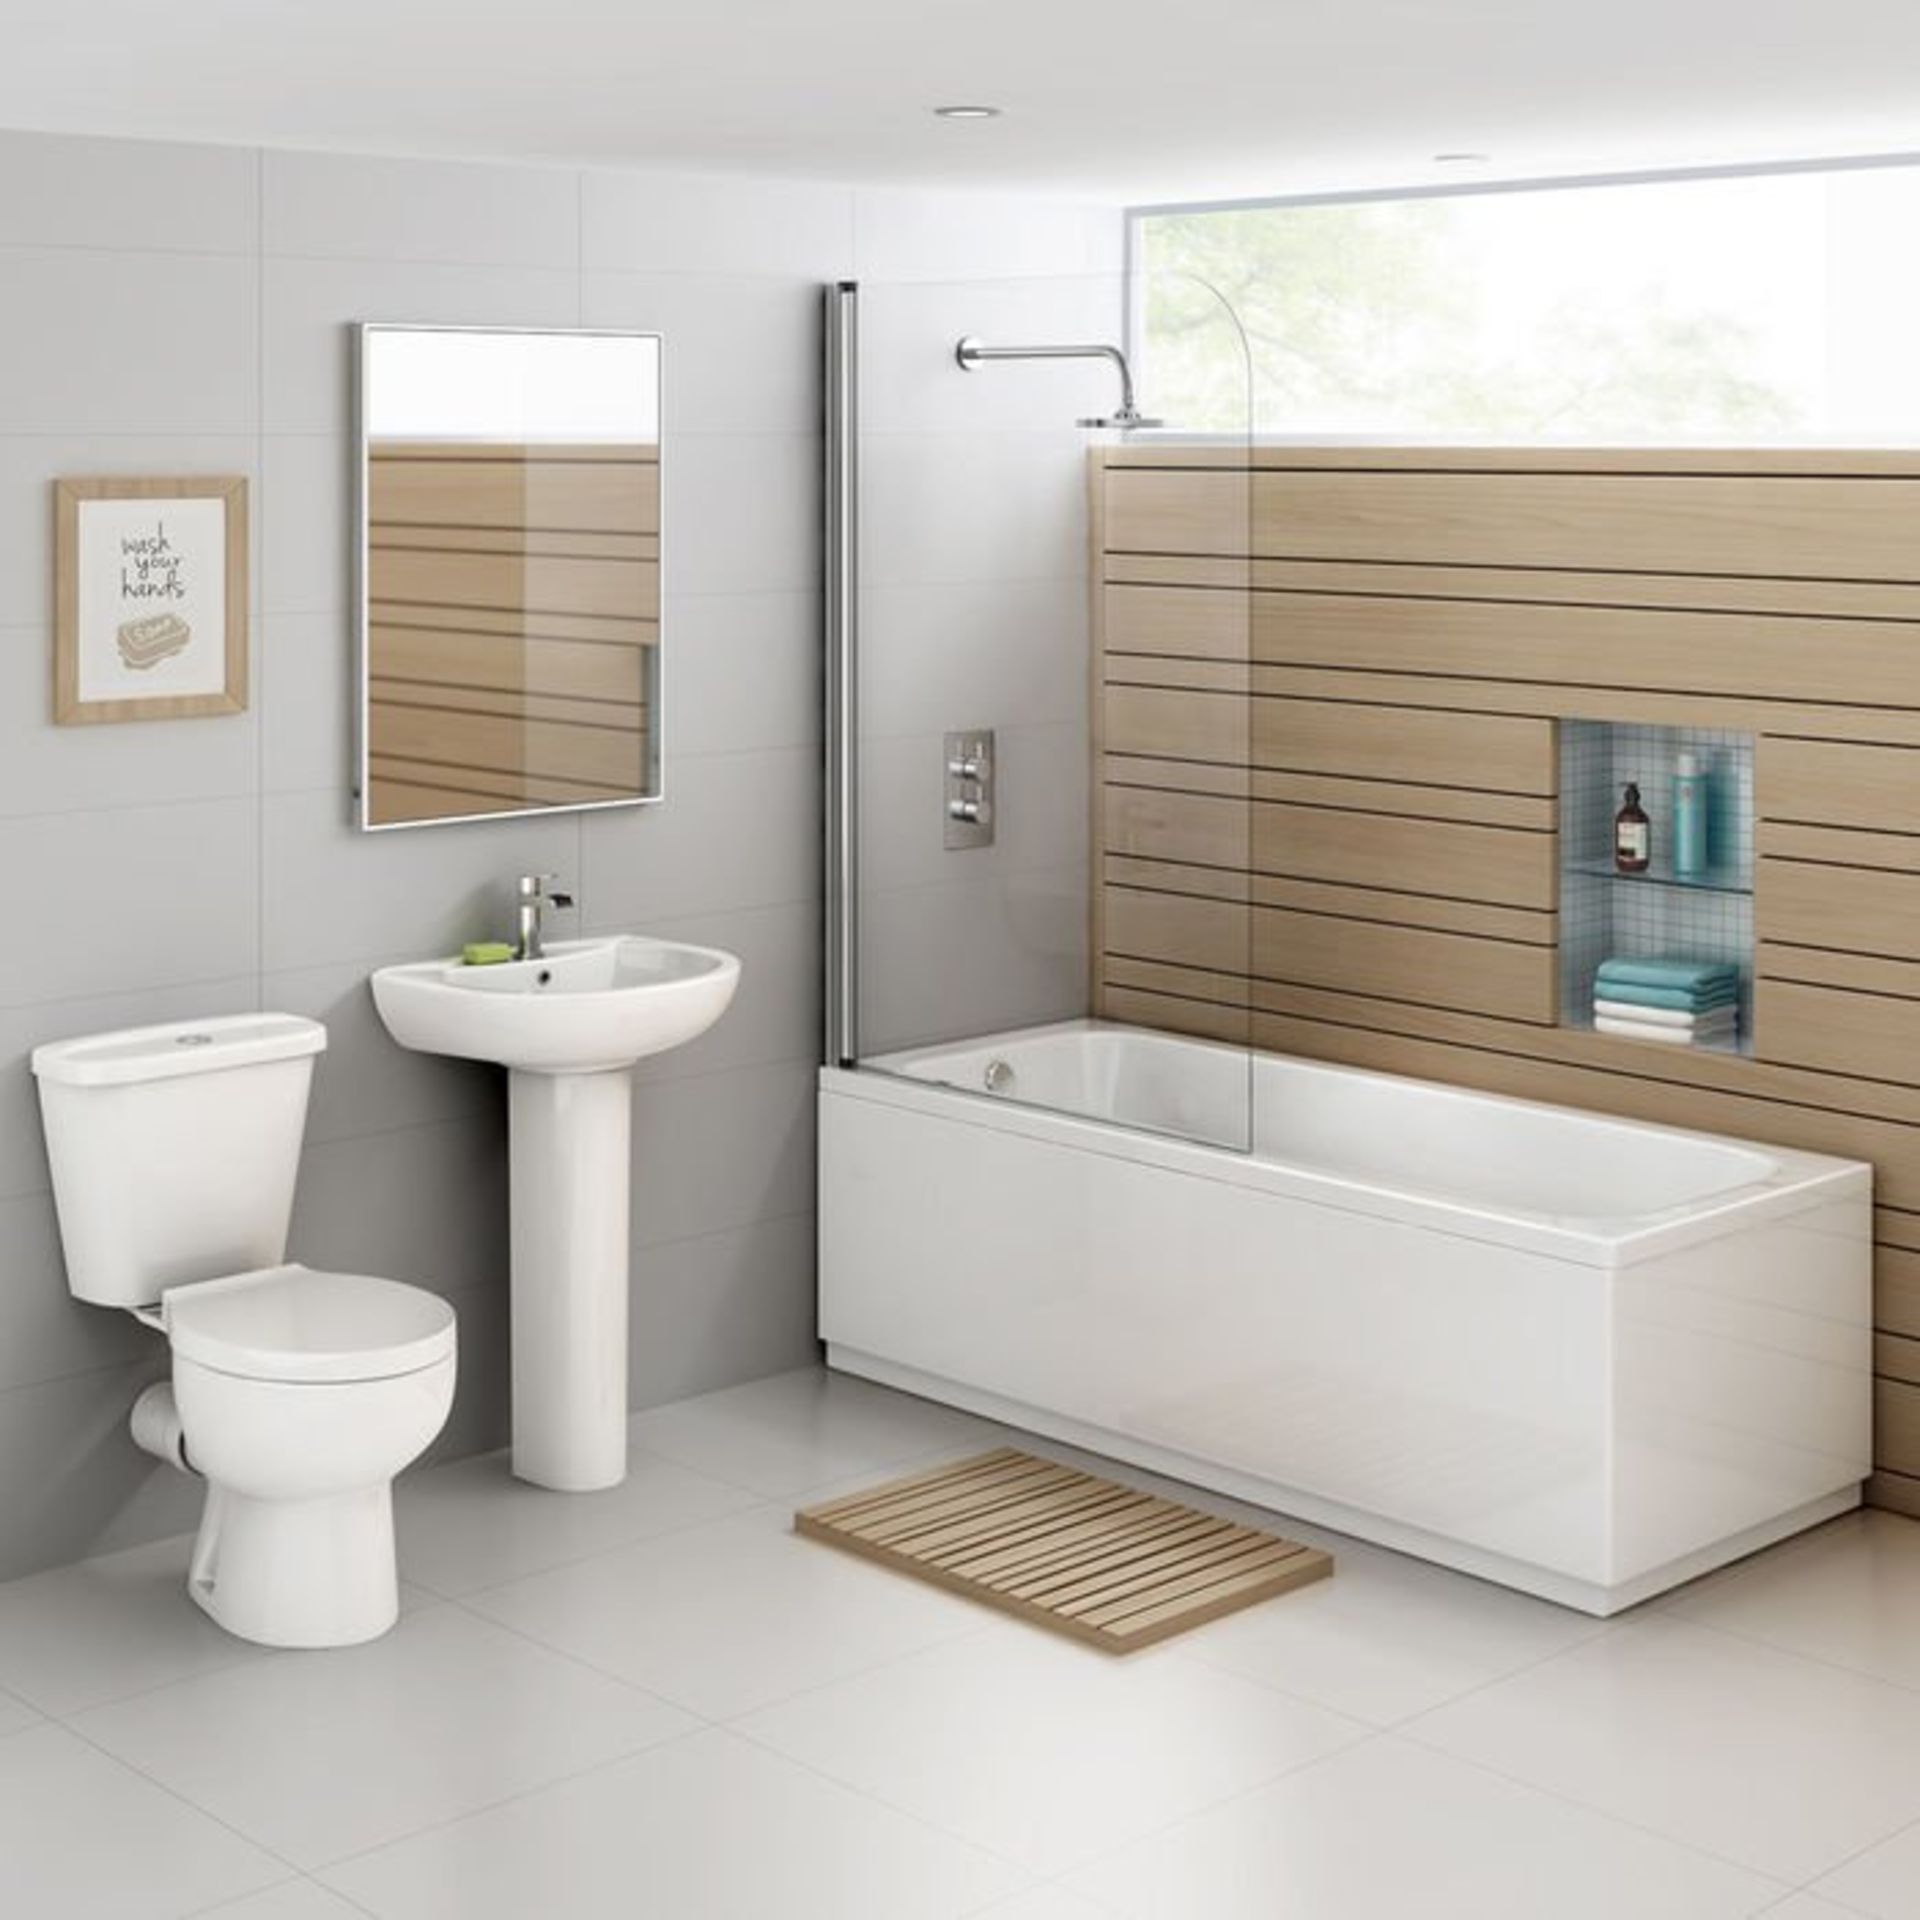 (Y81) 1000mm - 4mm - Straight Bath Screen. RRP £149.99. A great addition to your shower bath 4mm